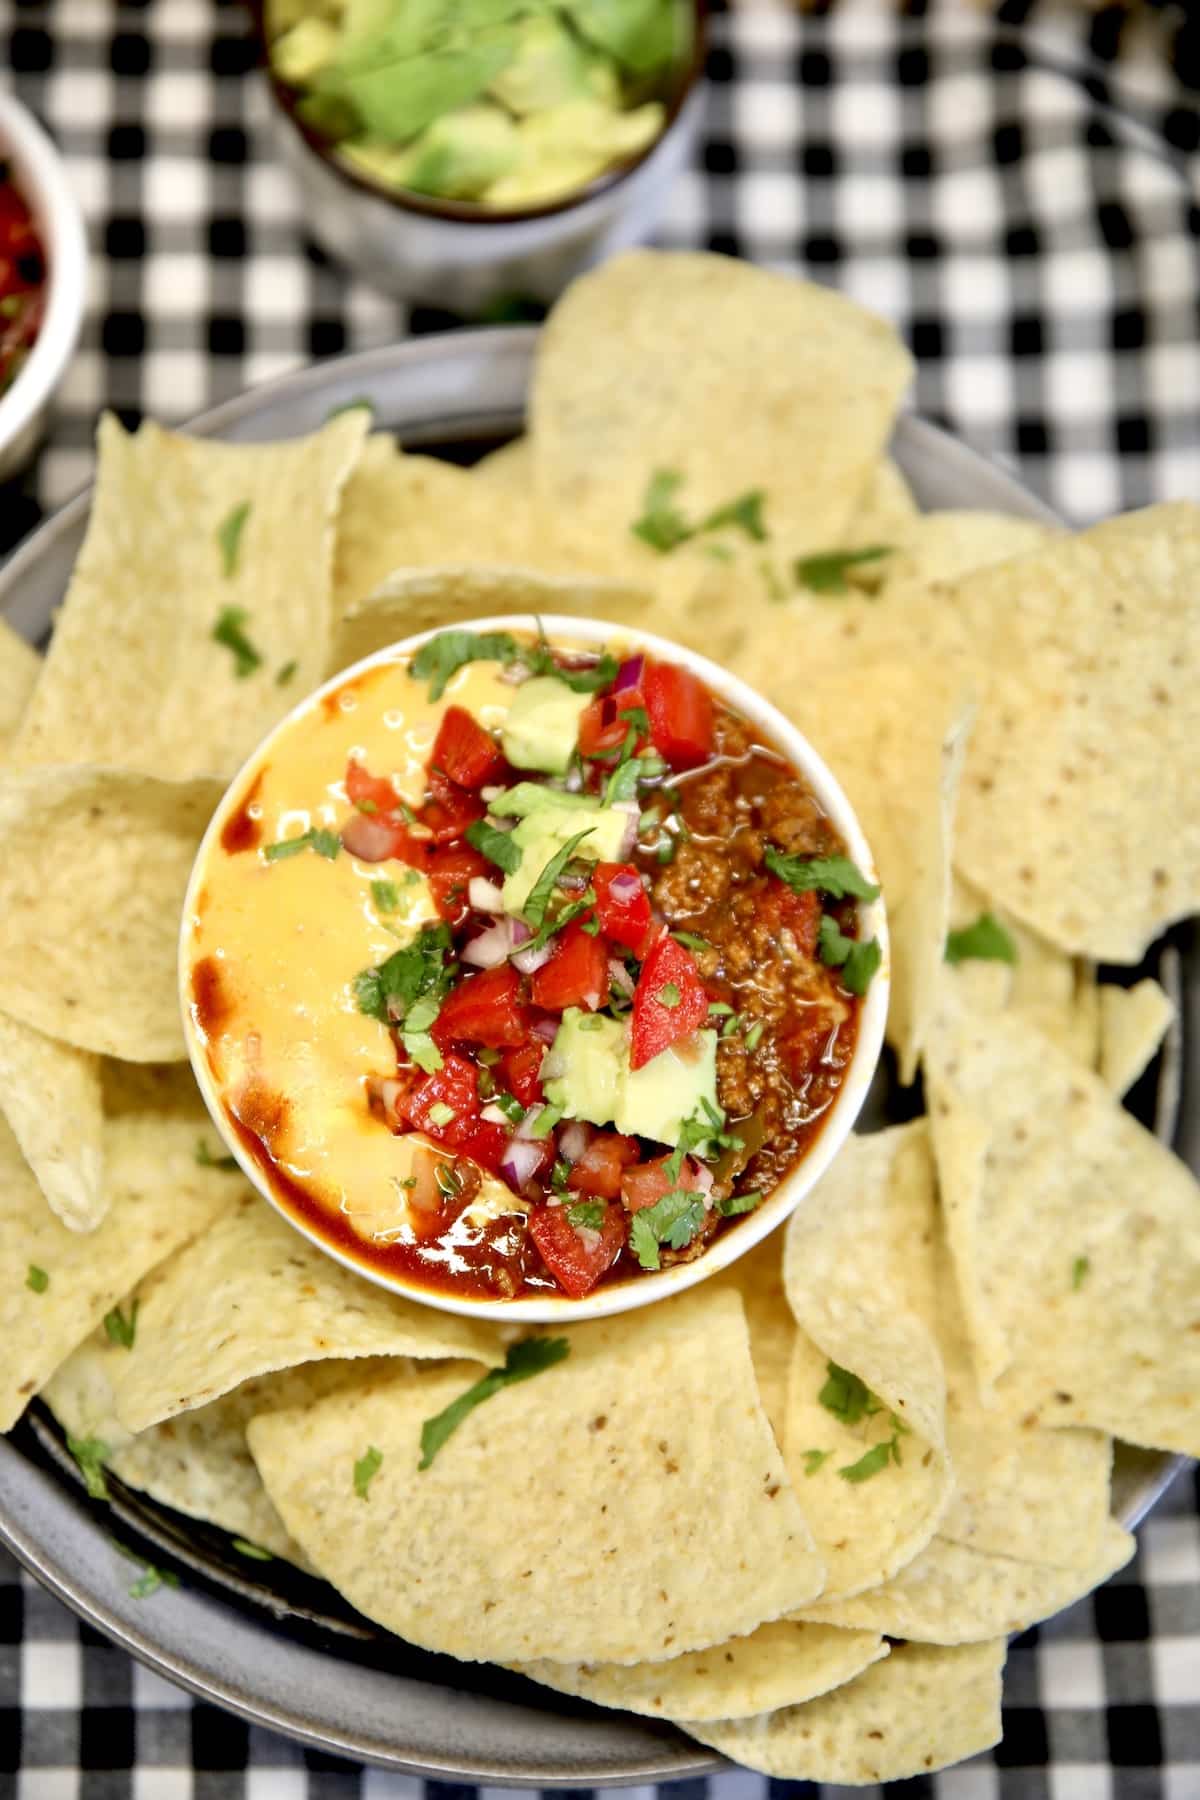 Platter of tortilla chips with chili cheese dip.